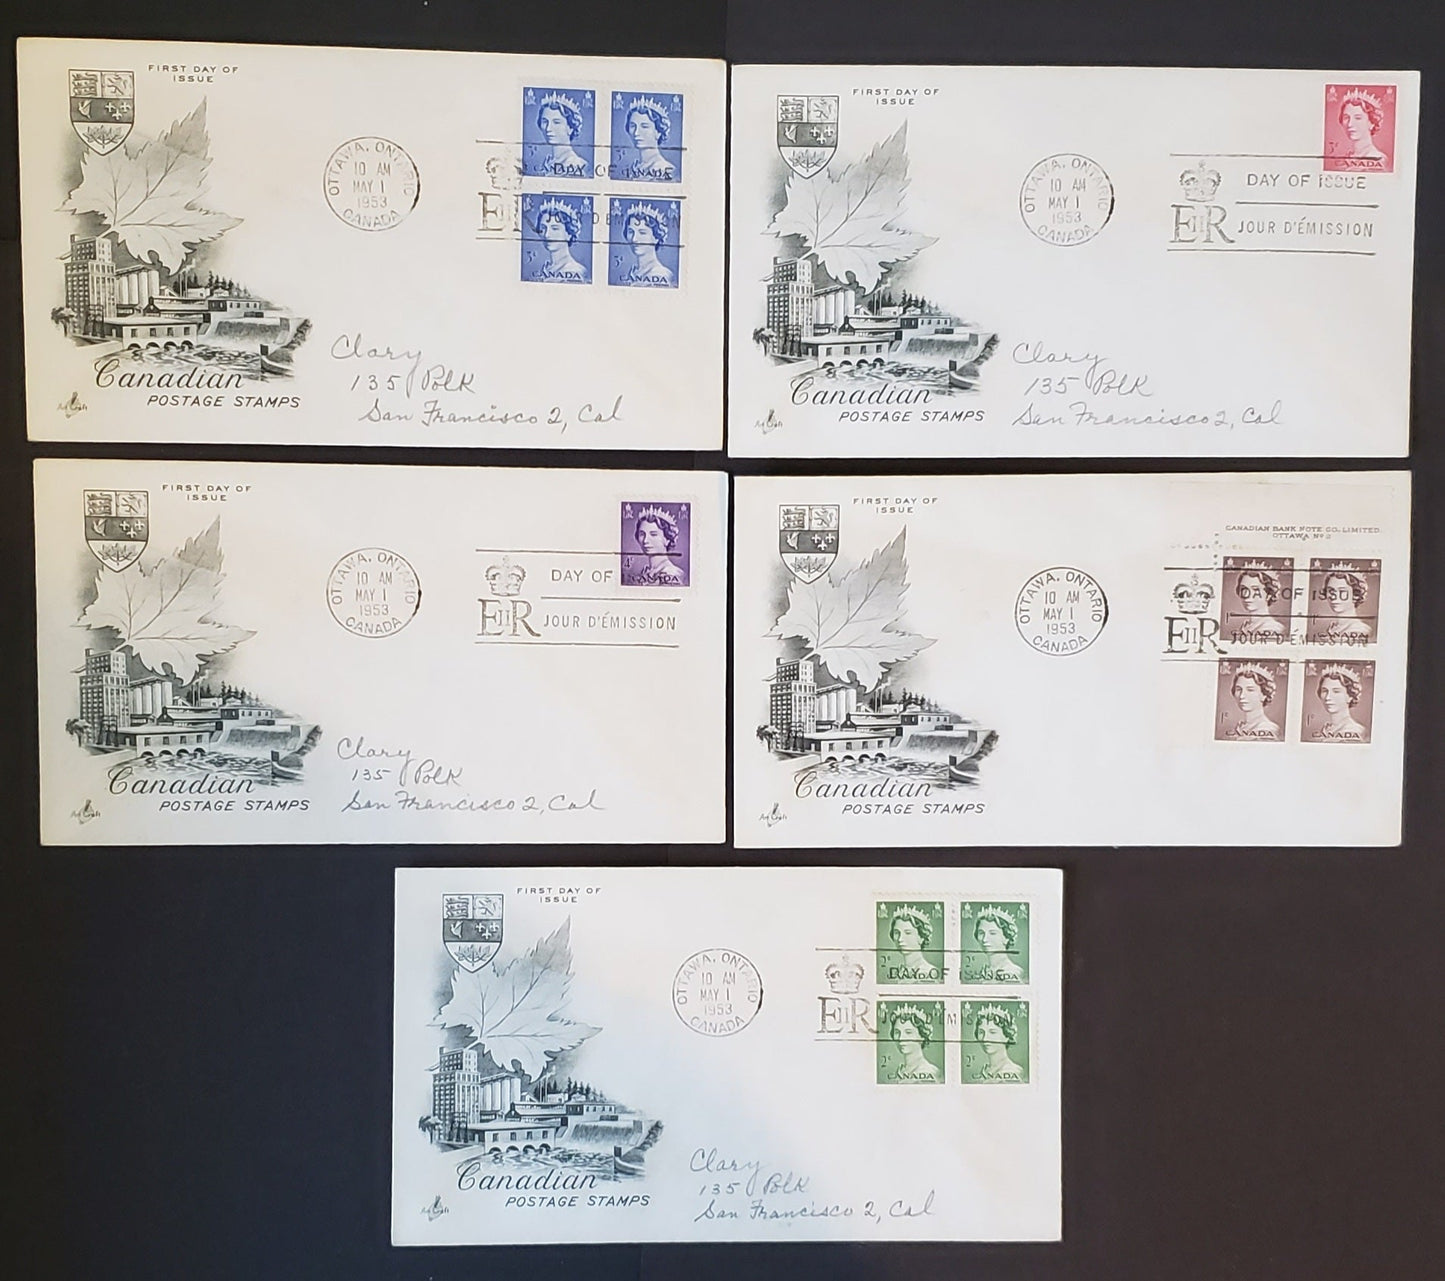 Lot 8 Canada #325-329 1c-5c Violet Brown-Ultramarine Queen Elizabeth II 1953 Karsh Issue, 5 Artcraft A Cachets First Day Covers Franked With Singles & Blocks Of 4, All Addressed Except 1c, Cat. Value $40